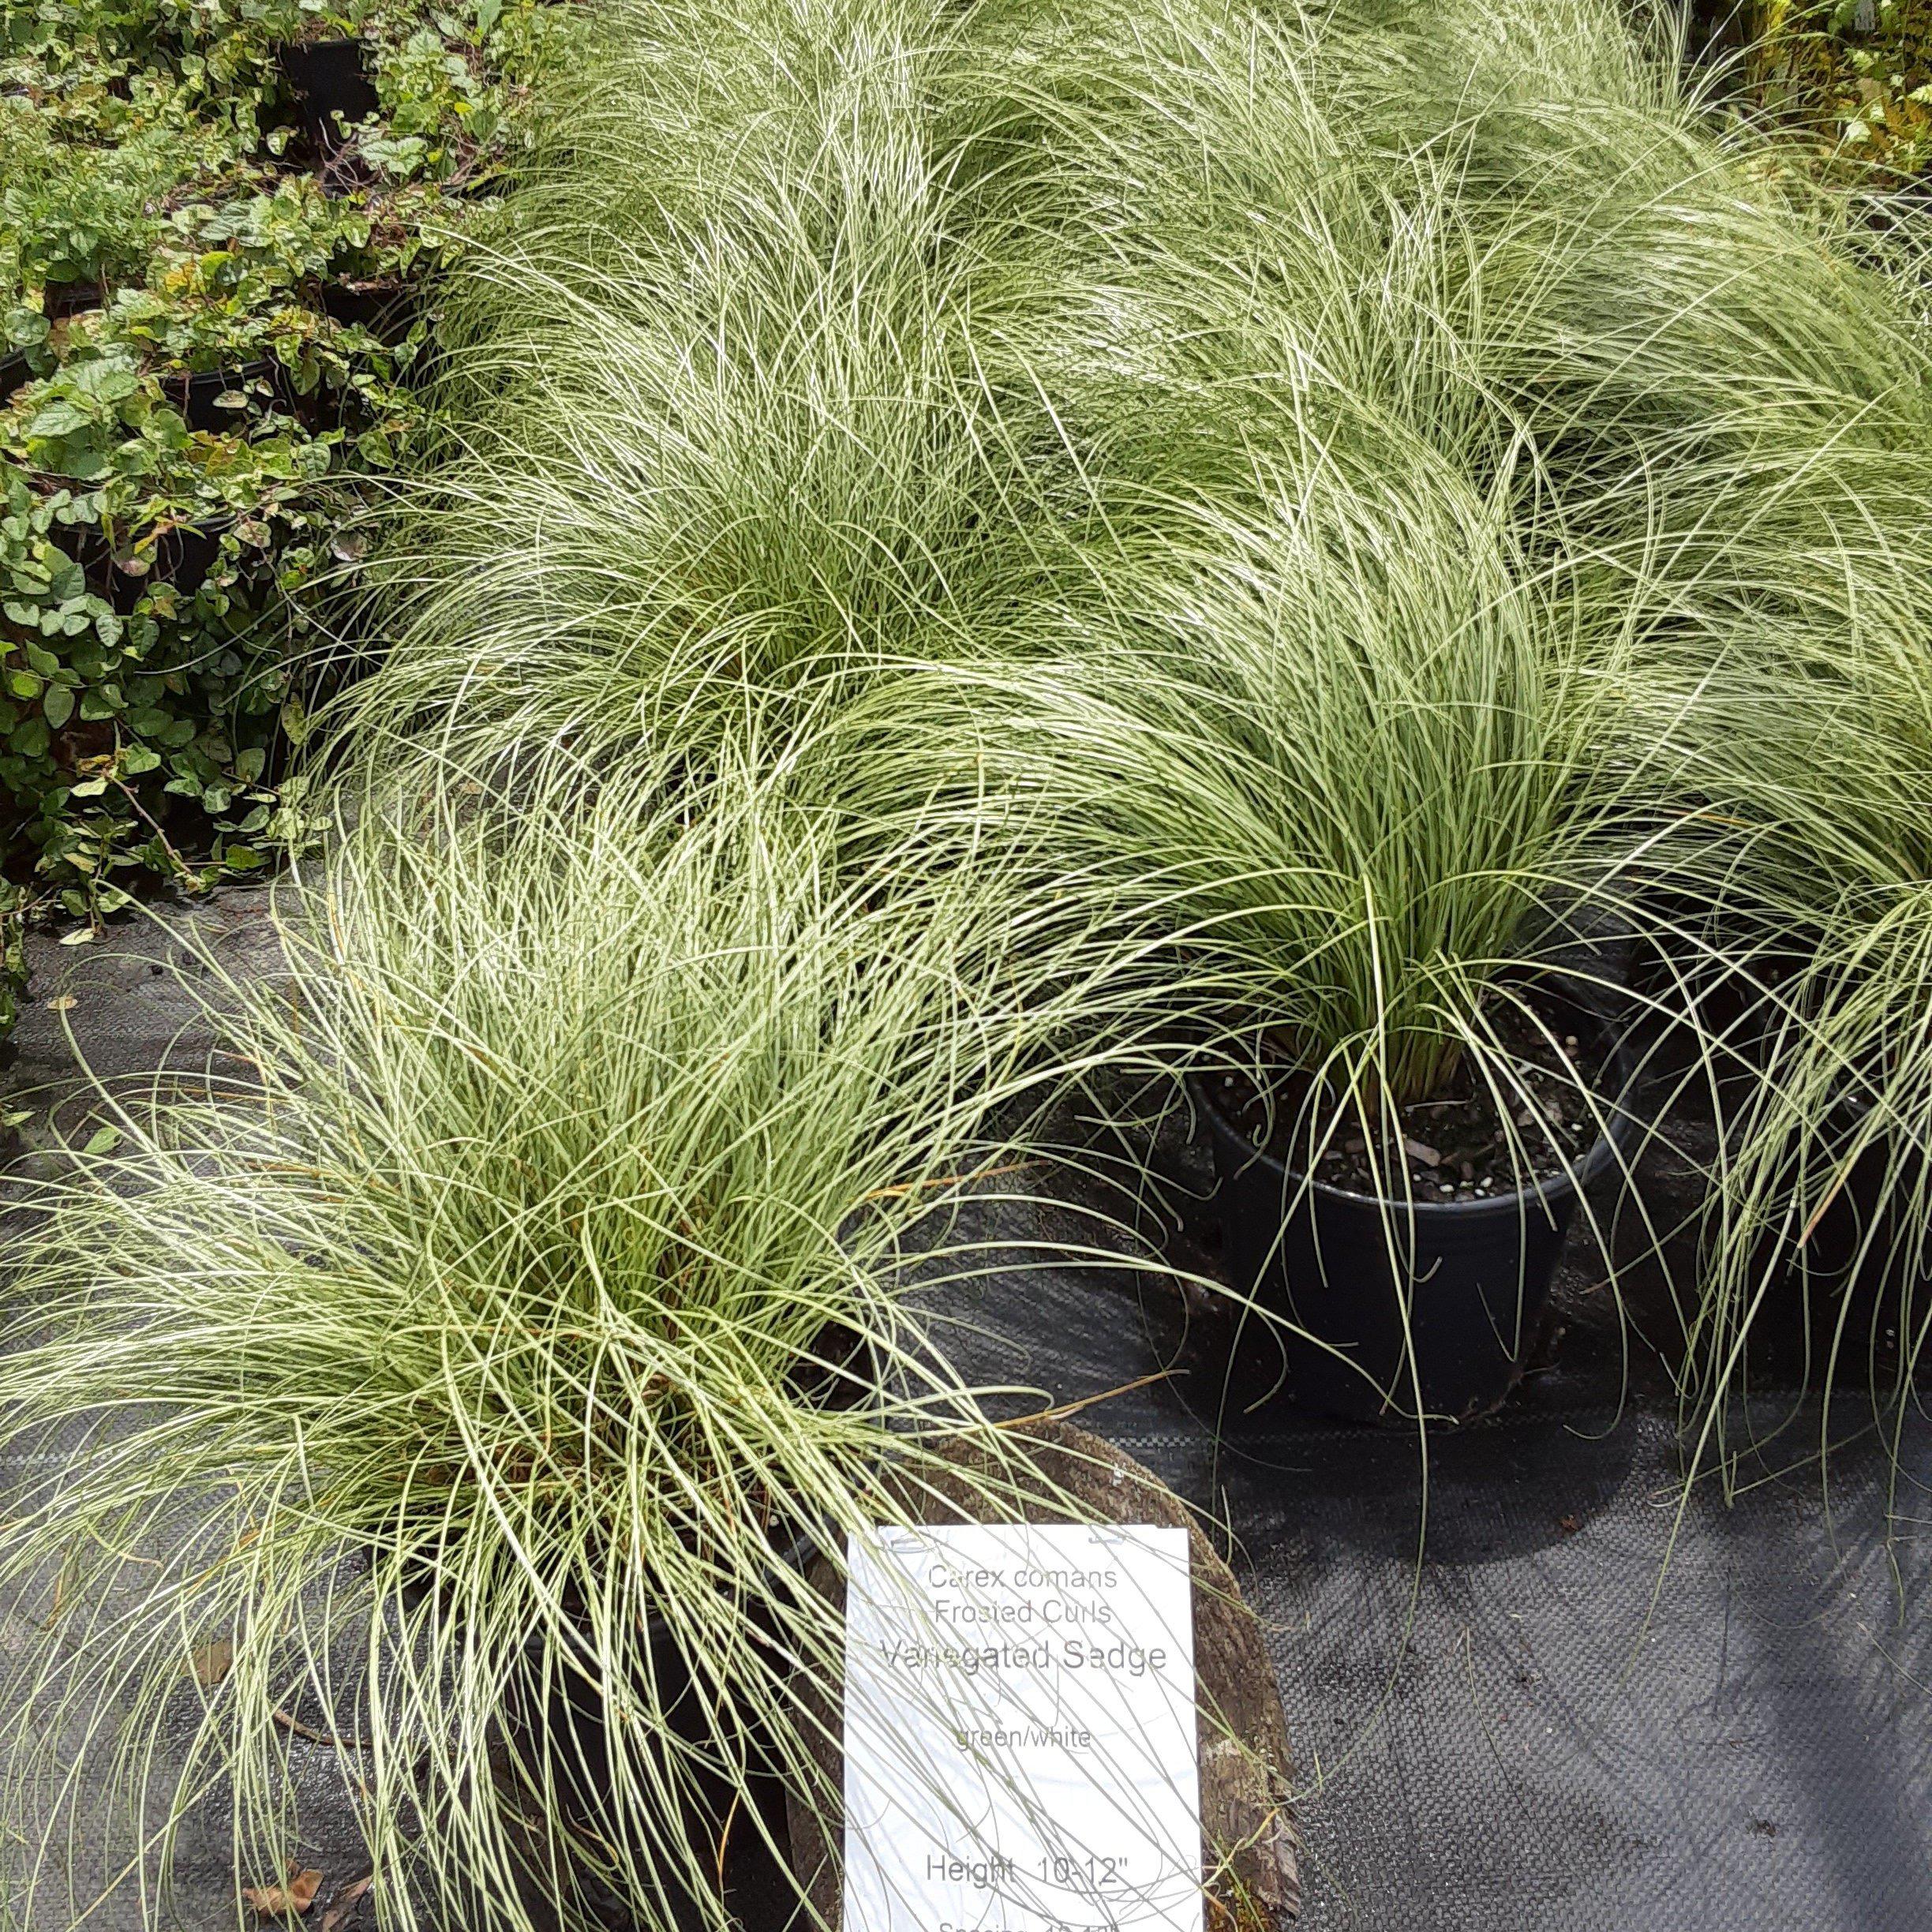 Carex comans 'Frosted Curls' ~ Frosted Curls New Zealand Sedge